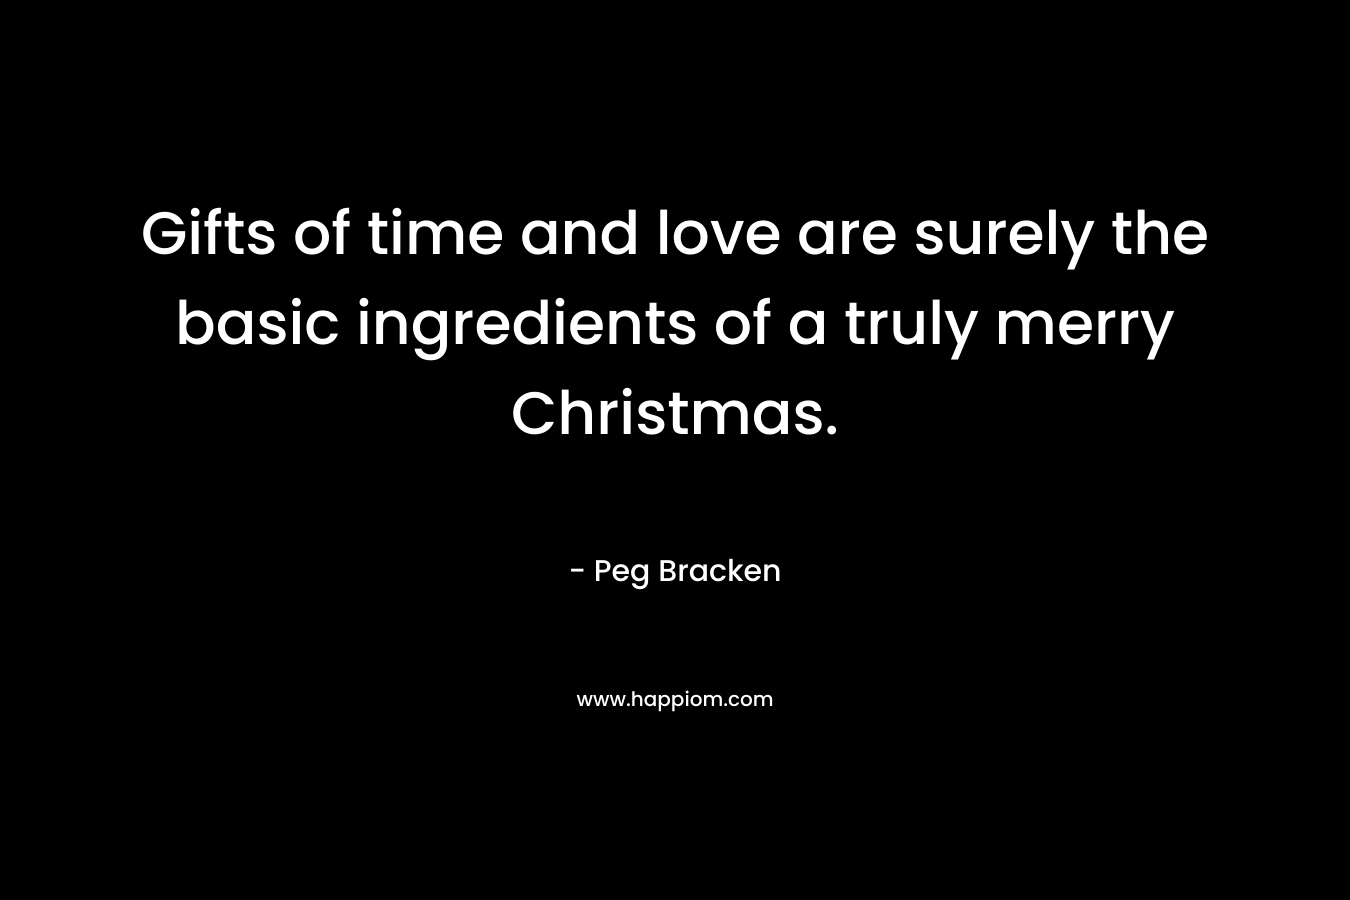 Gifts of time and love are surely the basic ingredients of a truly merry Christmas. – Peg Bracken